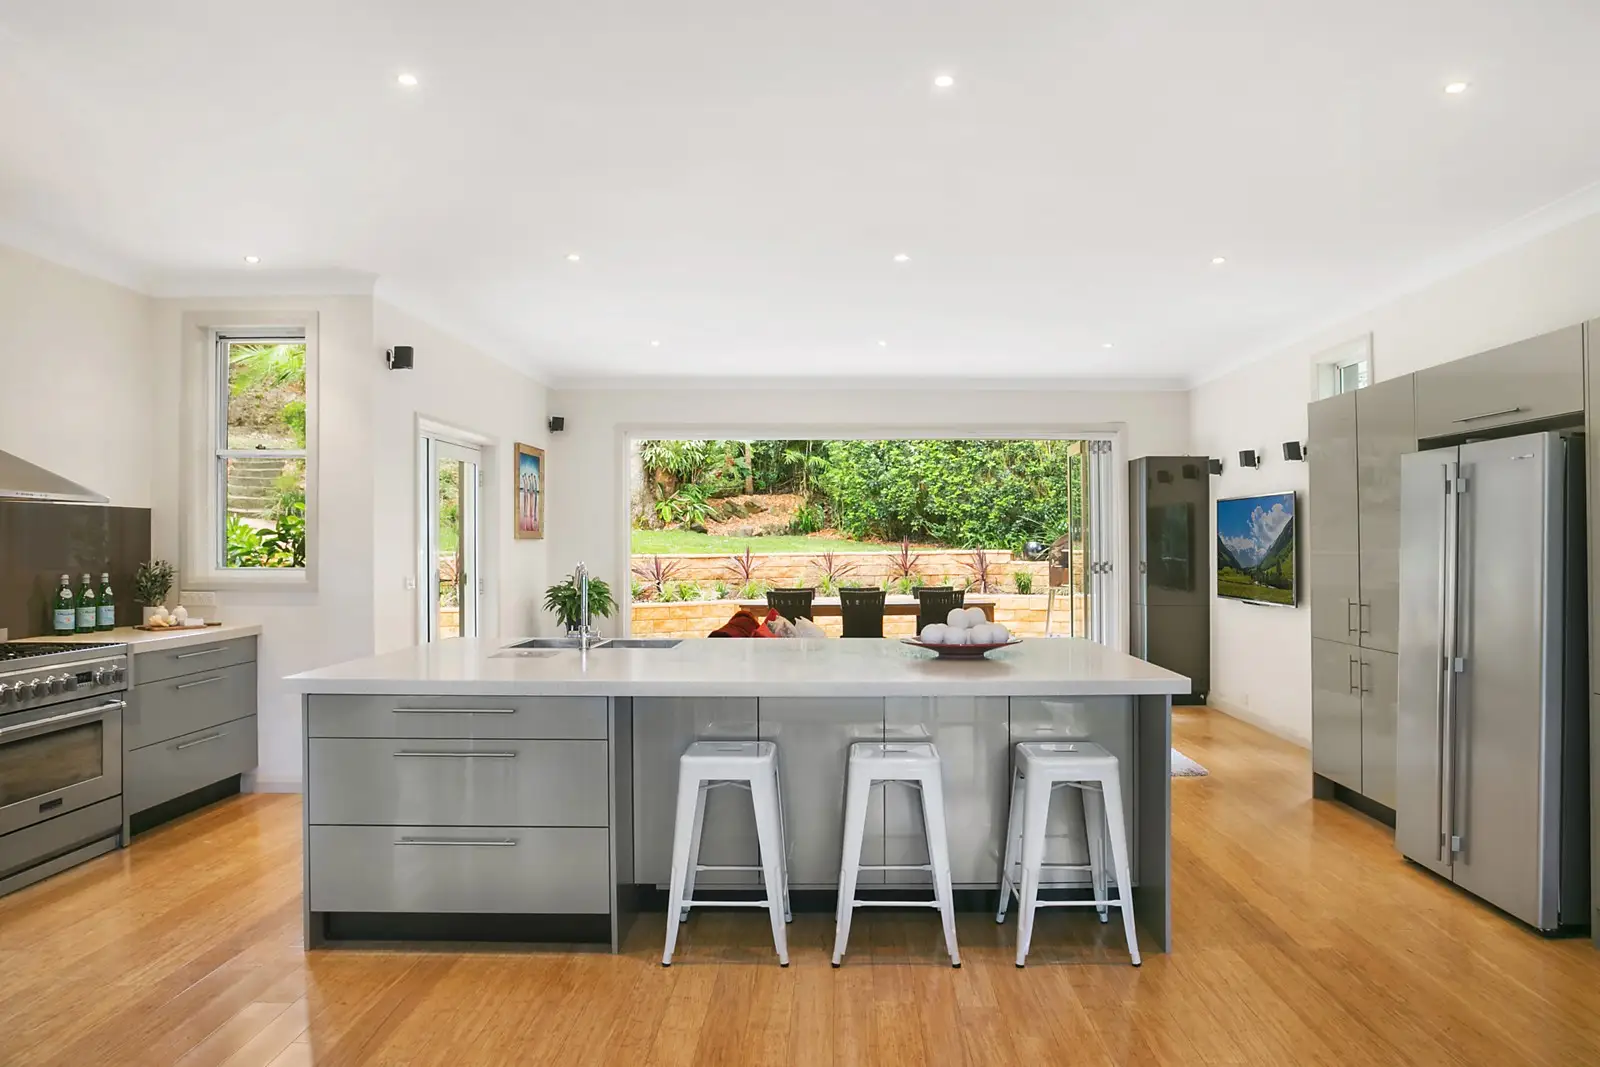 Photo #2: 14 Albion Avenue, Pymble - Sold by Sydney Sotheby's International Realty